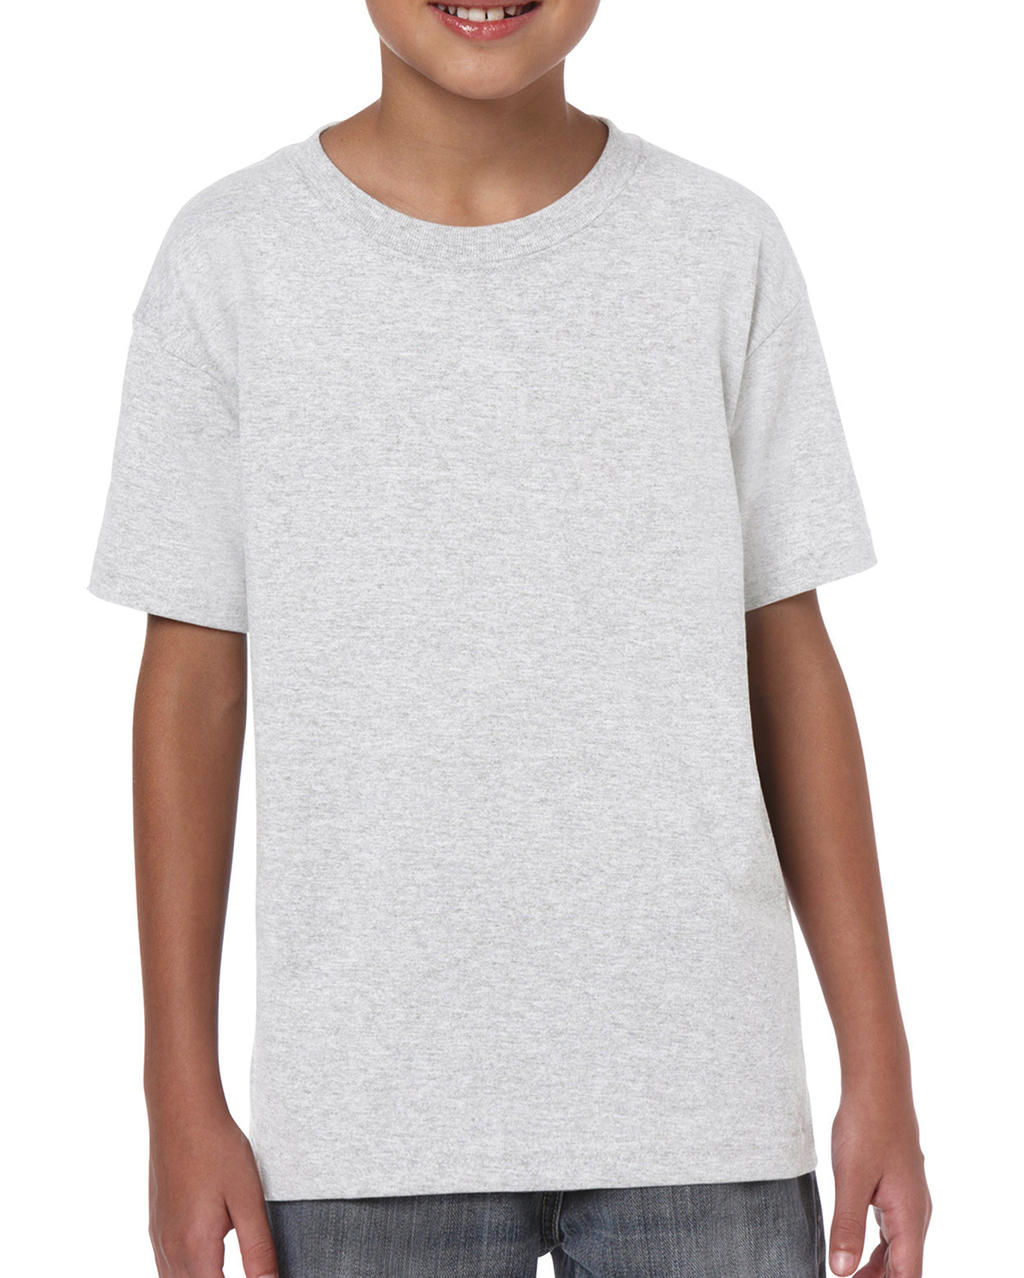  Heavy Cotton Youth T-Shirt in Farbe Ash Grey